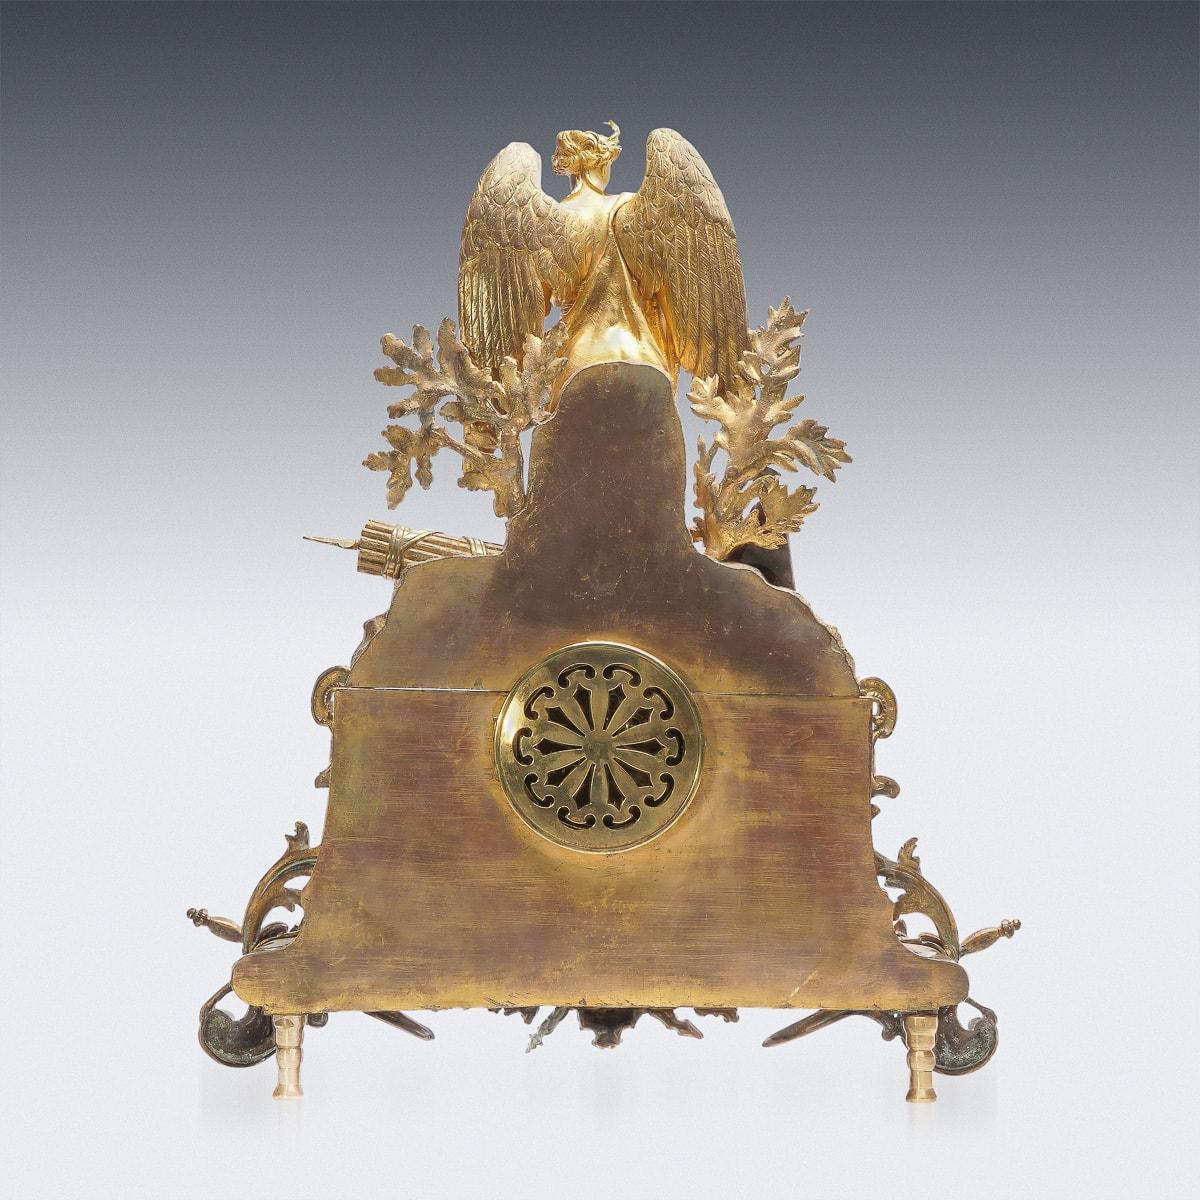 Antique 19th Century French Empire style ormolu bronze mantle clock. The foliate surround gilt dial, Inside with eight day movement with strike on bell. The top mounted with a figure of an angel on the rectangular base with applied reliefs, raised